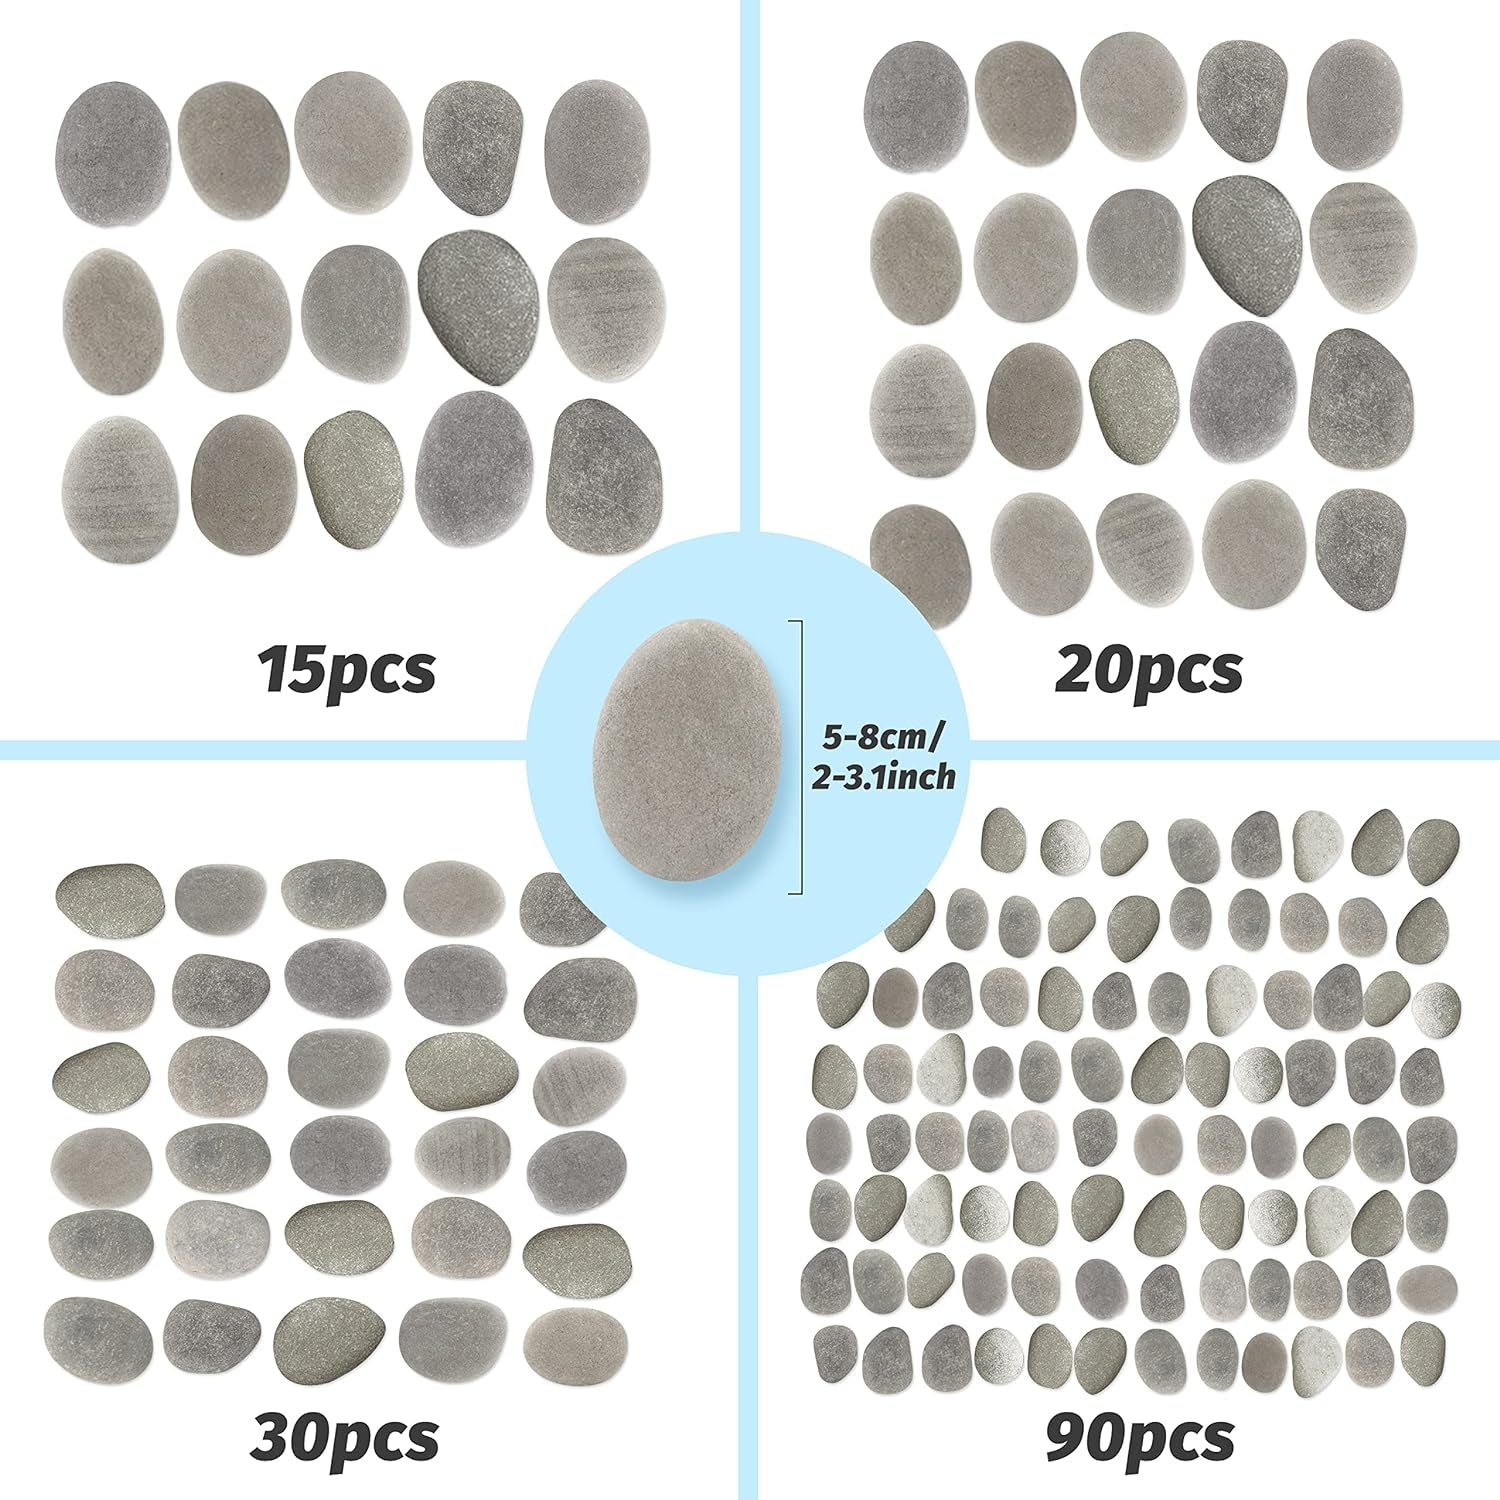 15PCS Large Painting Rocks, Natural River Rocks, Flat Rocks for Painting, 2-3 Inches Stones for Arts & Crafting